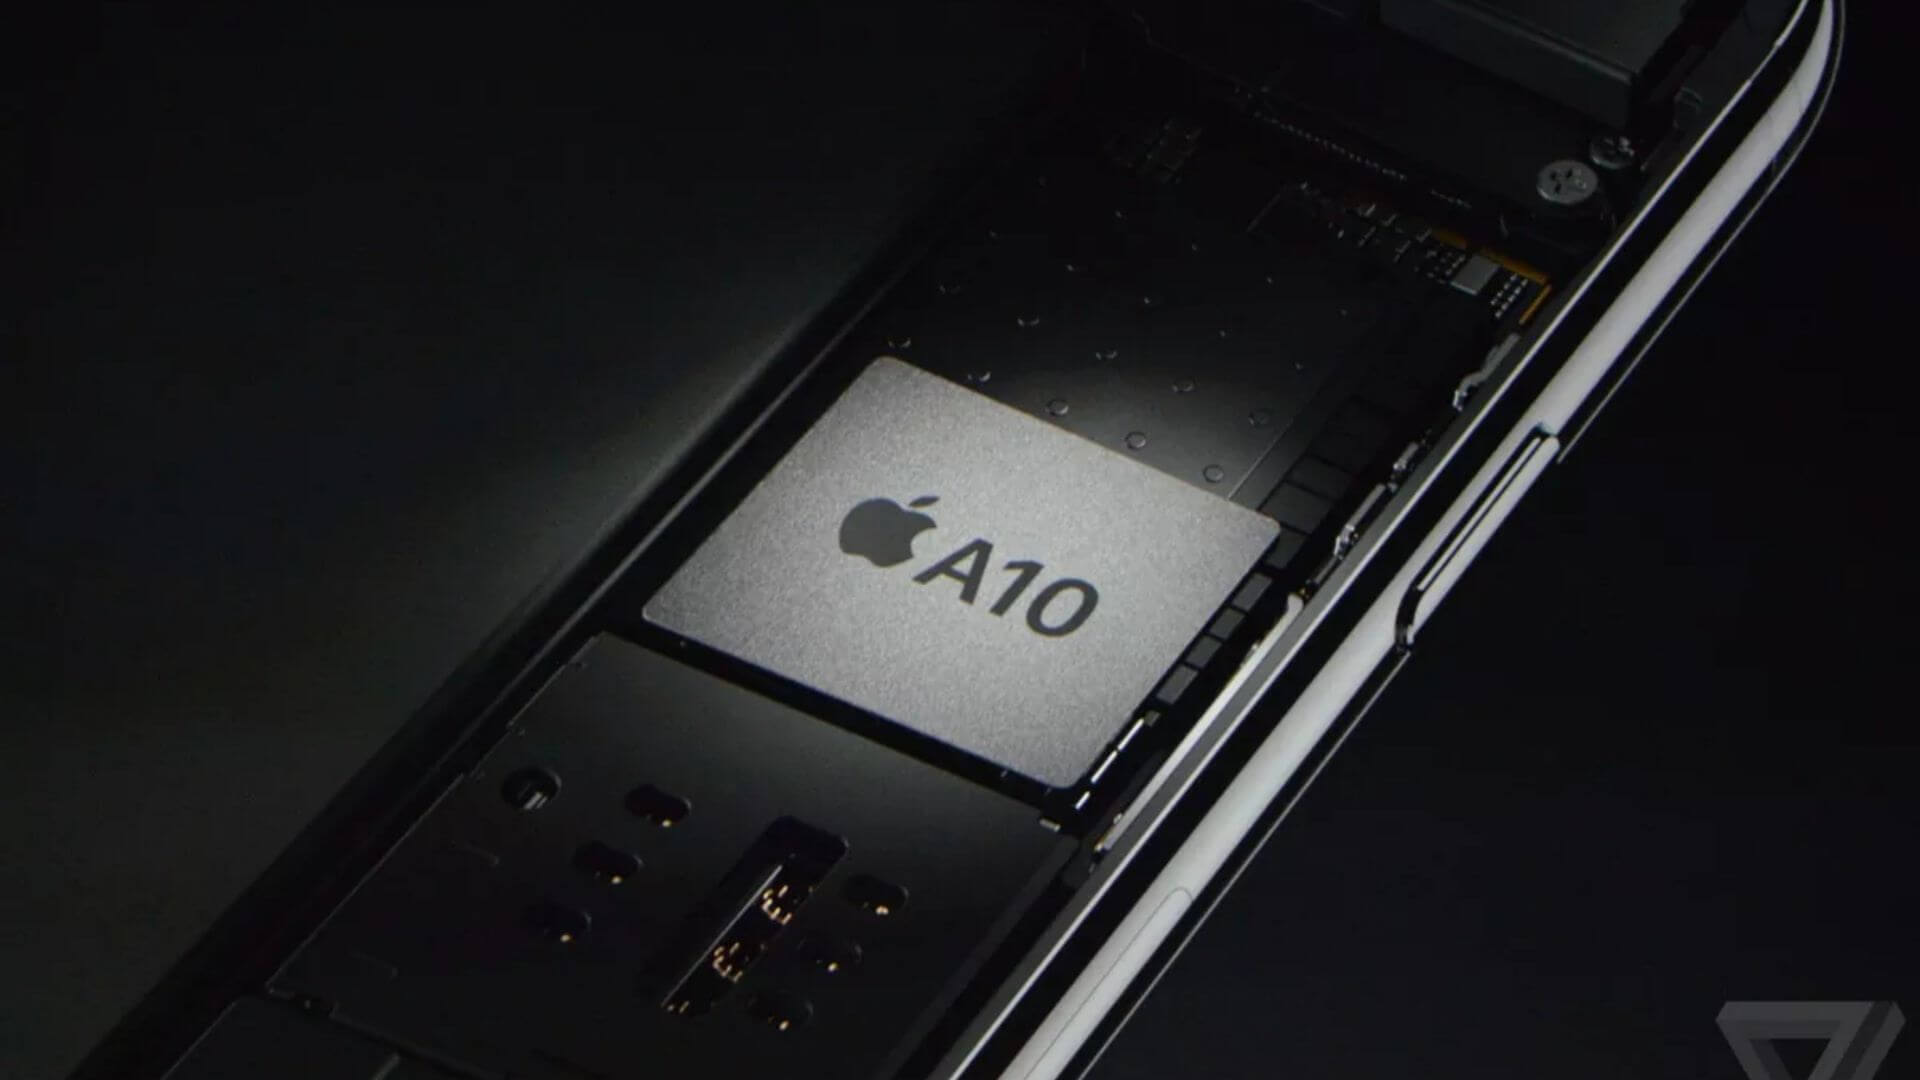 iPhone 7 comes with A10 Fusion chip